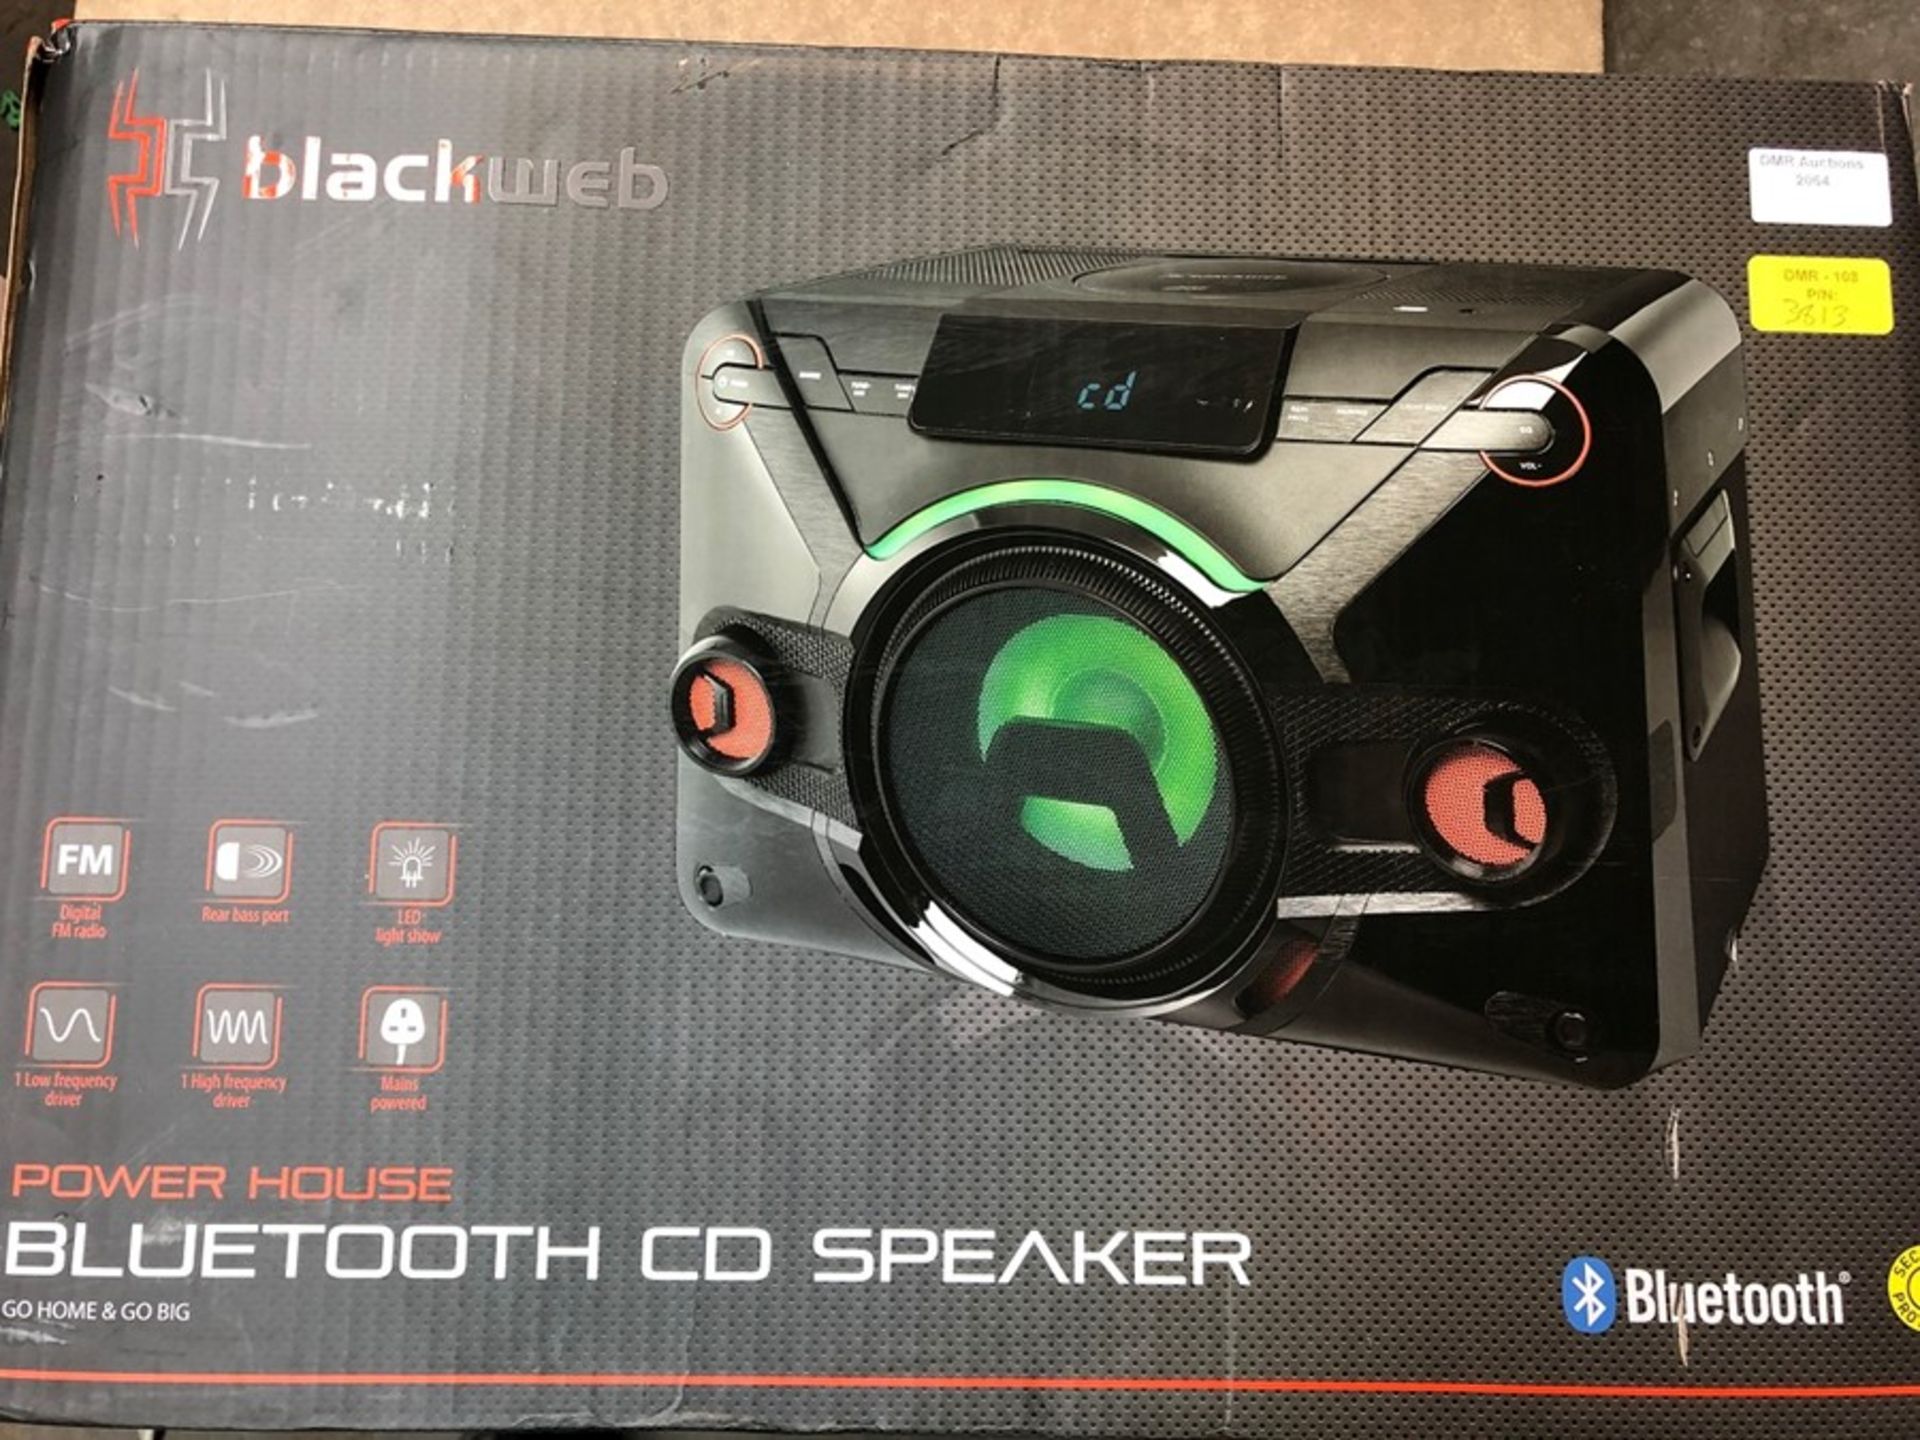 1 BOXED BLACK WEB POWER HOUSE BLUETOOTH CD SPEAKER IN BLACK / RRP £65.00 - BL -3813 (VIEWING